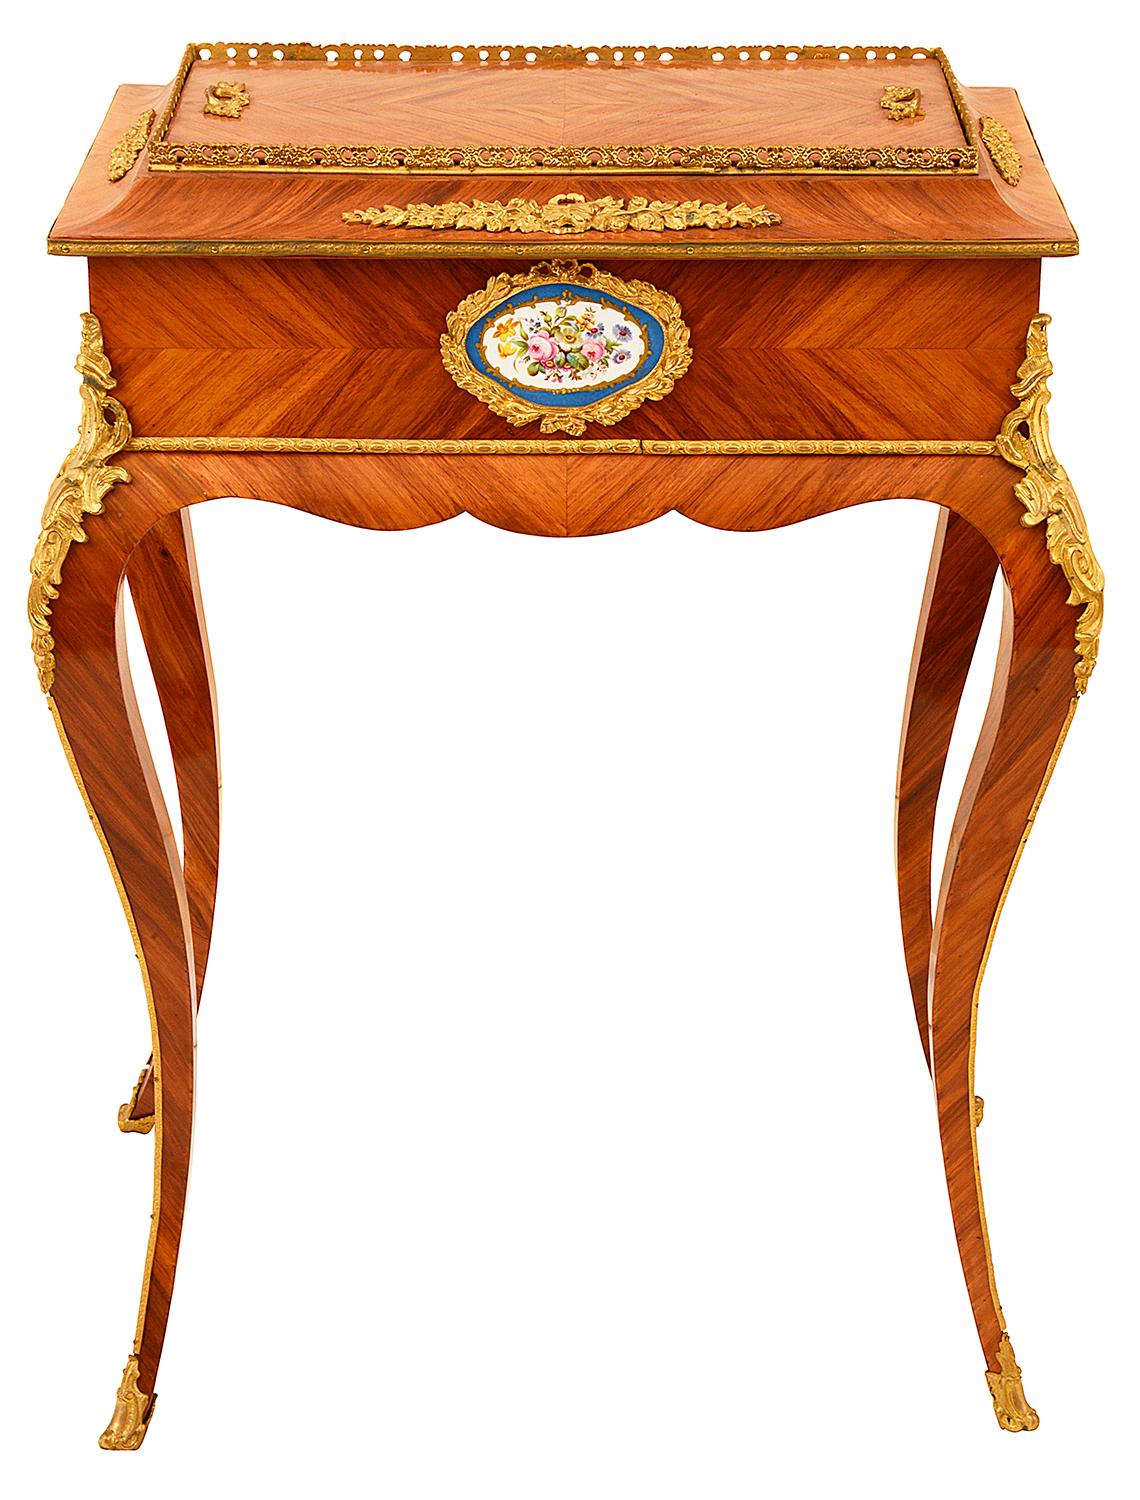 19th Century Sevres Porcelain Mounted Side Table / Plater In Good Condition For Sale In Brighton, Sussex